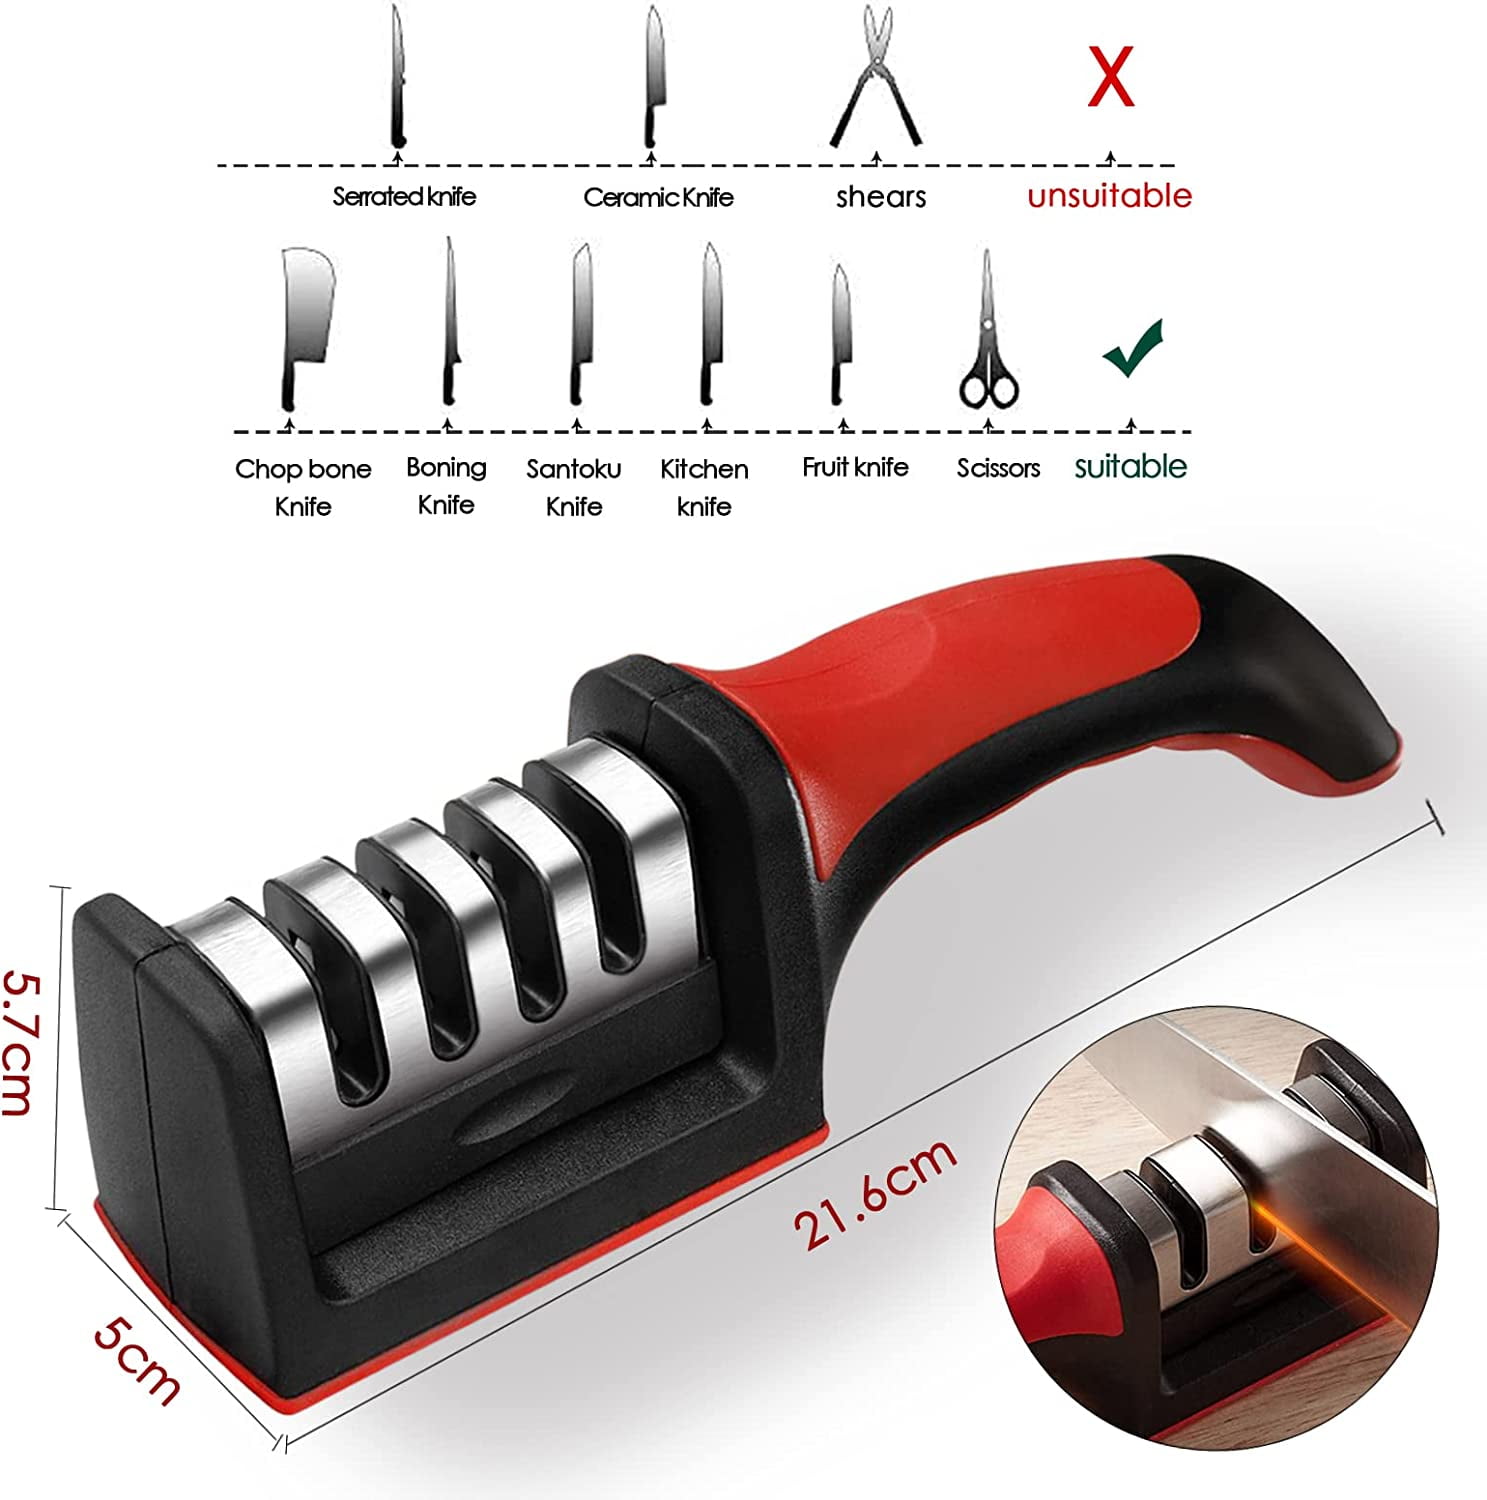  Mueller 4-in-1, 4-Stage Best Knife Sharpener for Hunting, Heavy  Duty Diamond Blade Really Works for Ceramic, Steel Knives and Scissors:  Home & Kitchen